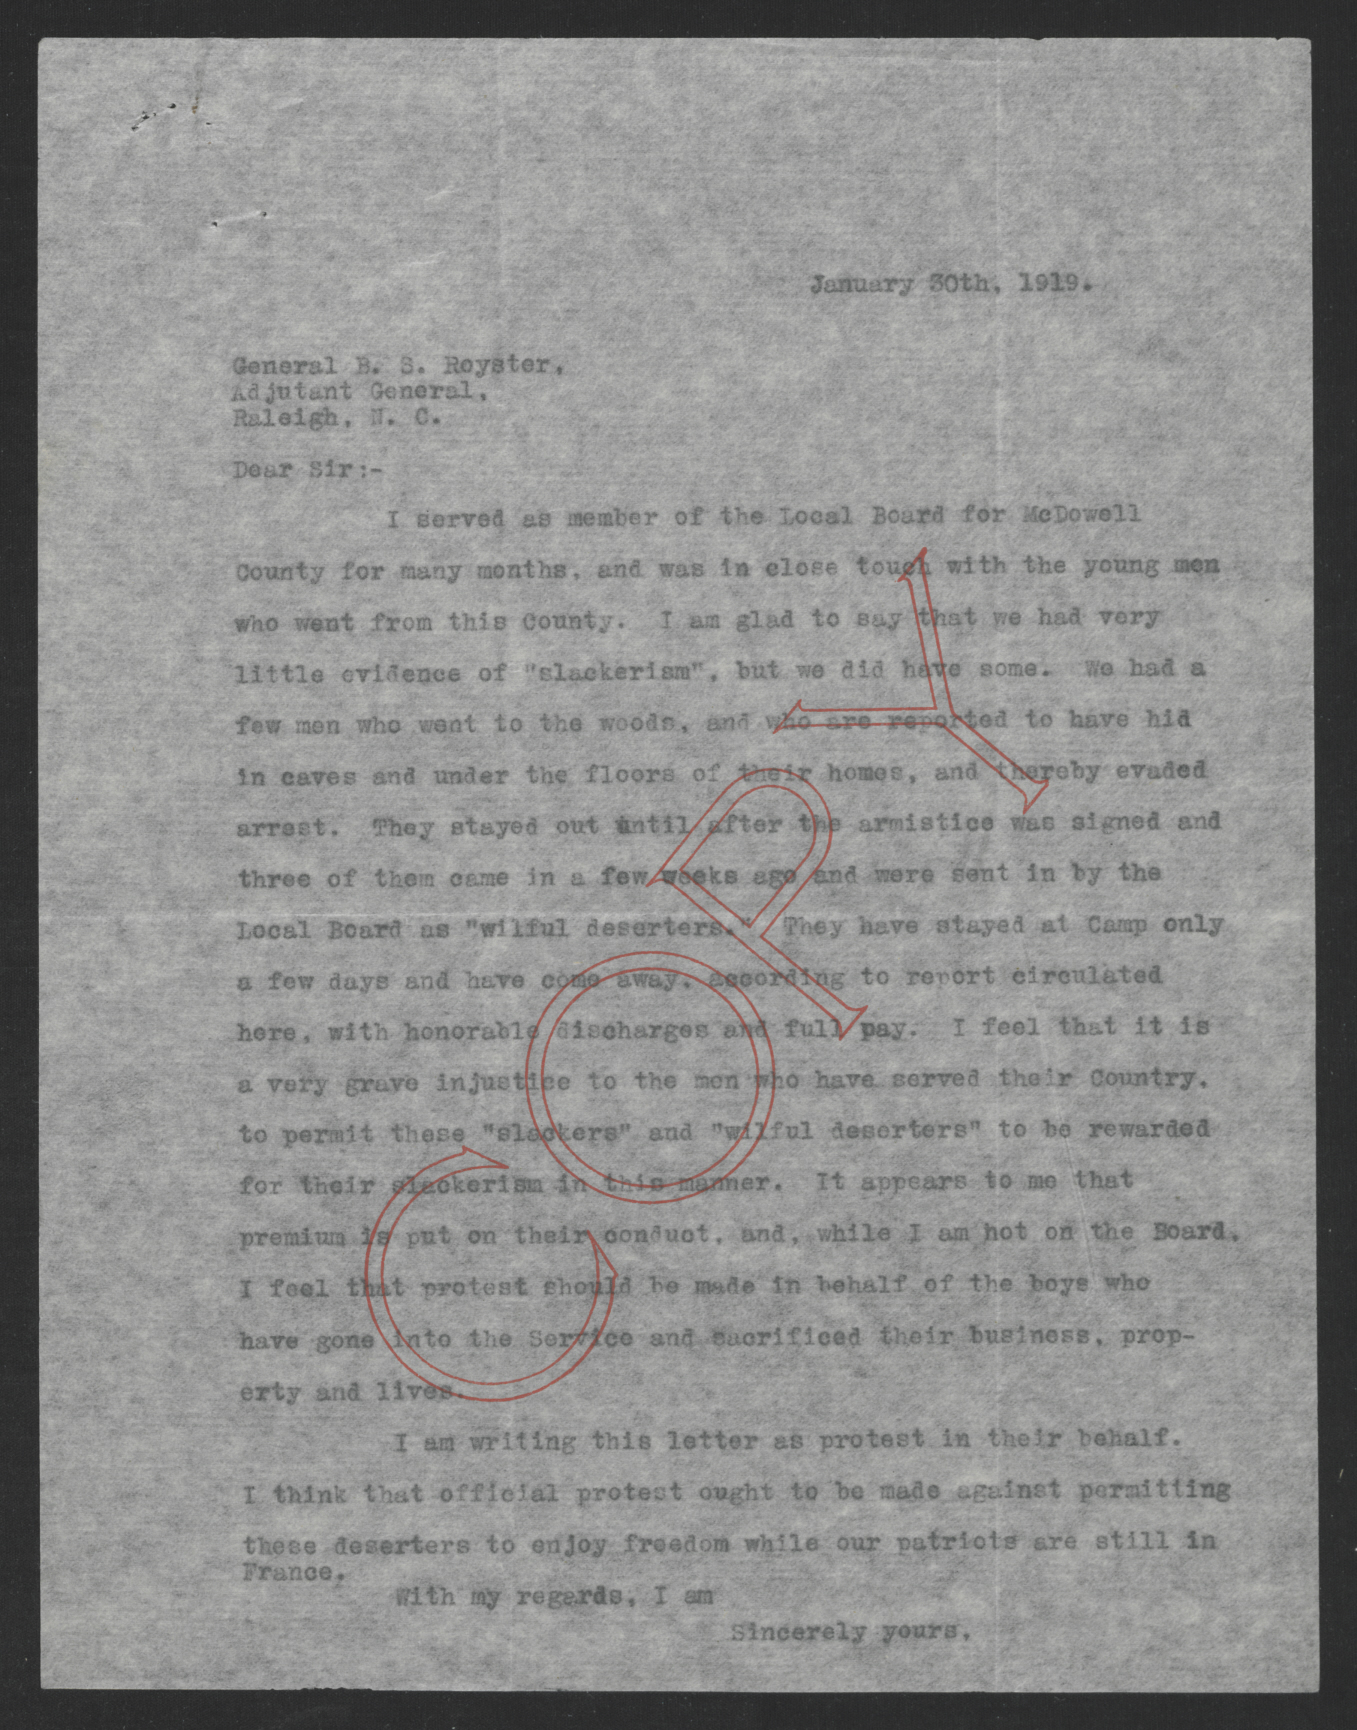 Letter from John W. Winborne to Beverly S. Royster, January 30, 1919